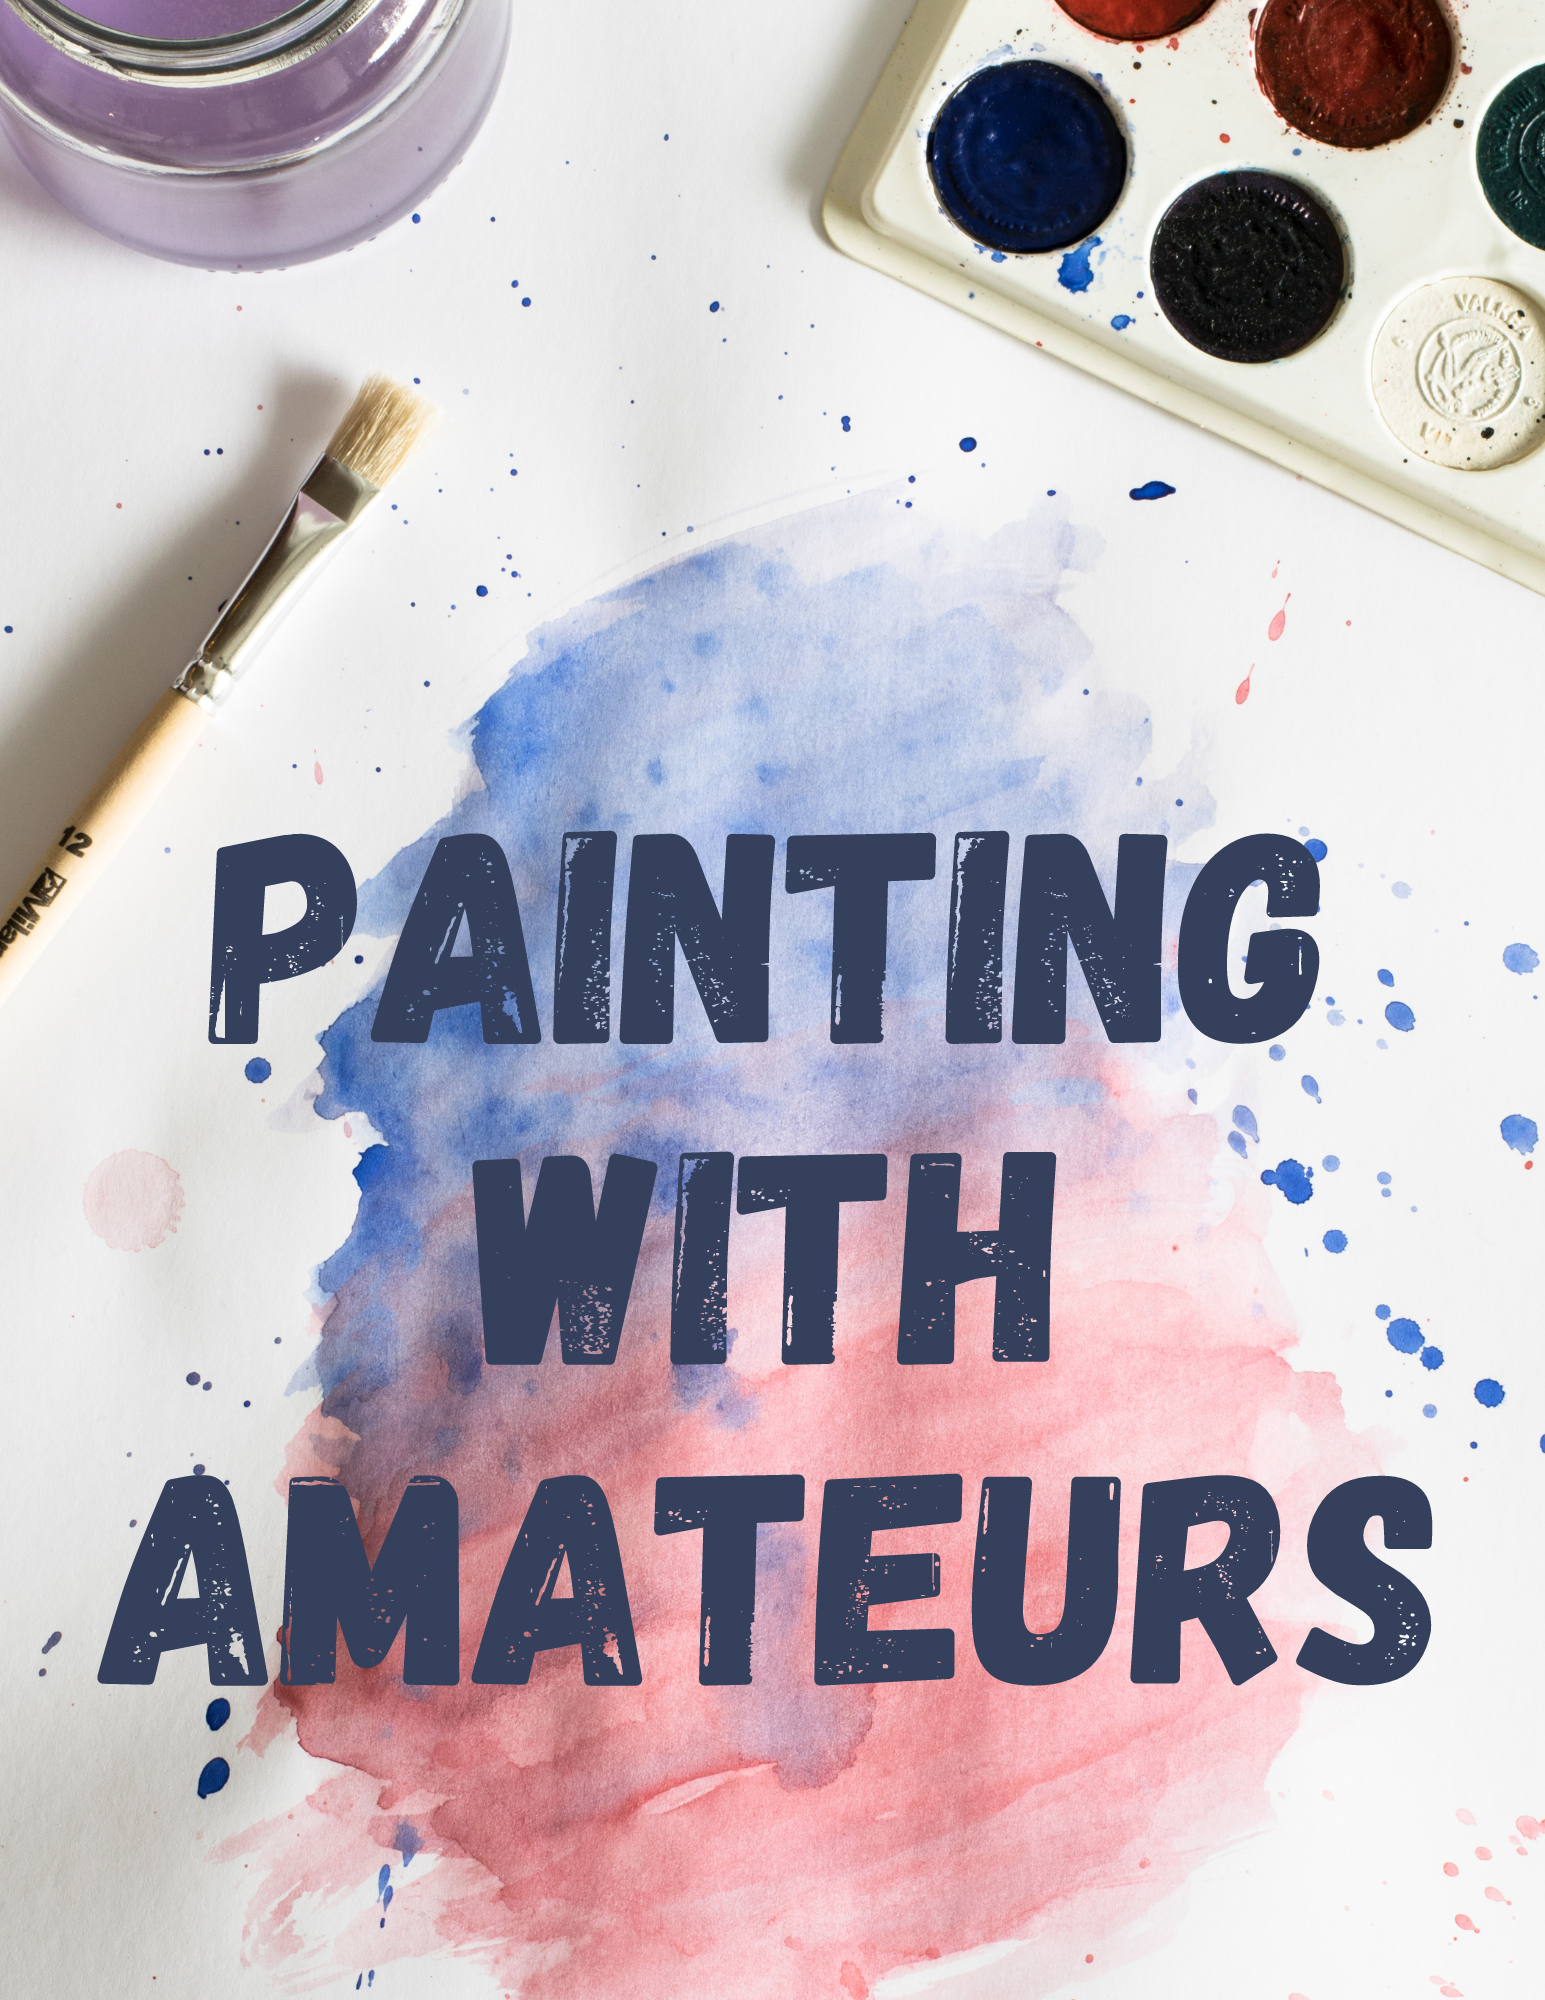 Background of watercolor painting with splatters under a paintbrush, partly visible water glass, and watercolor palette. Text: Painting With Amateurs